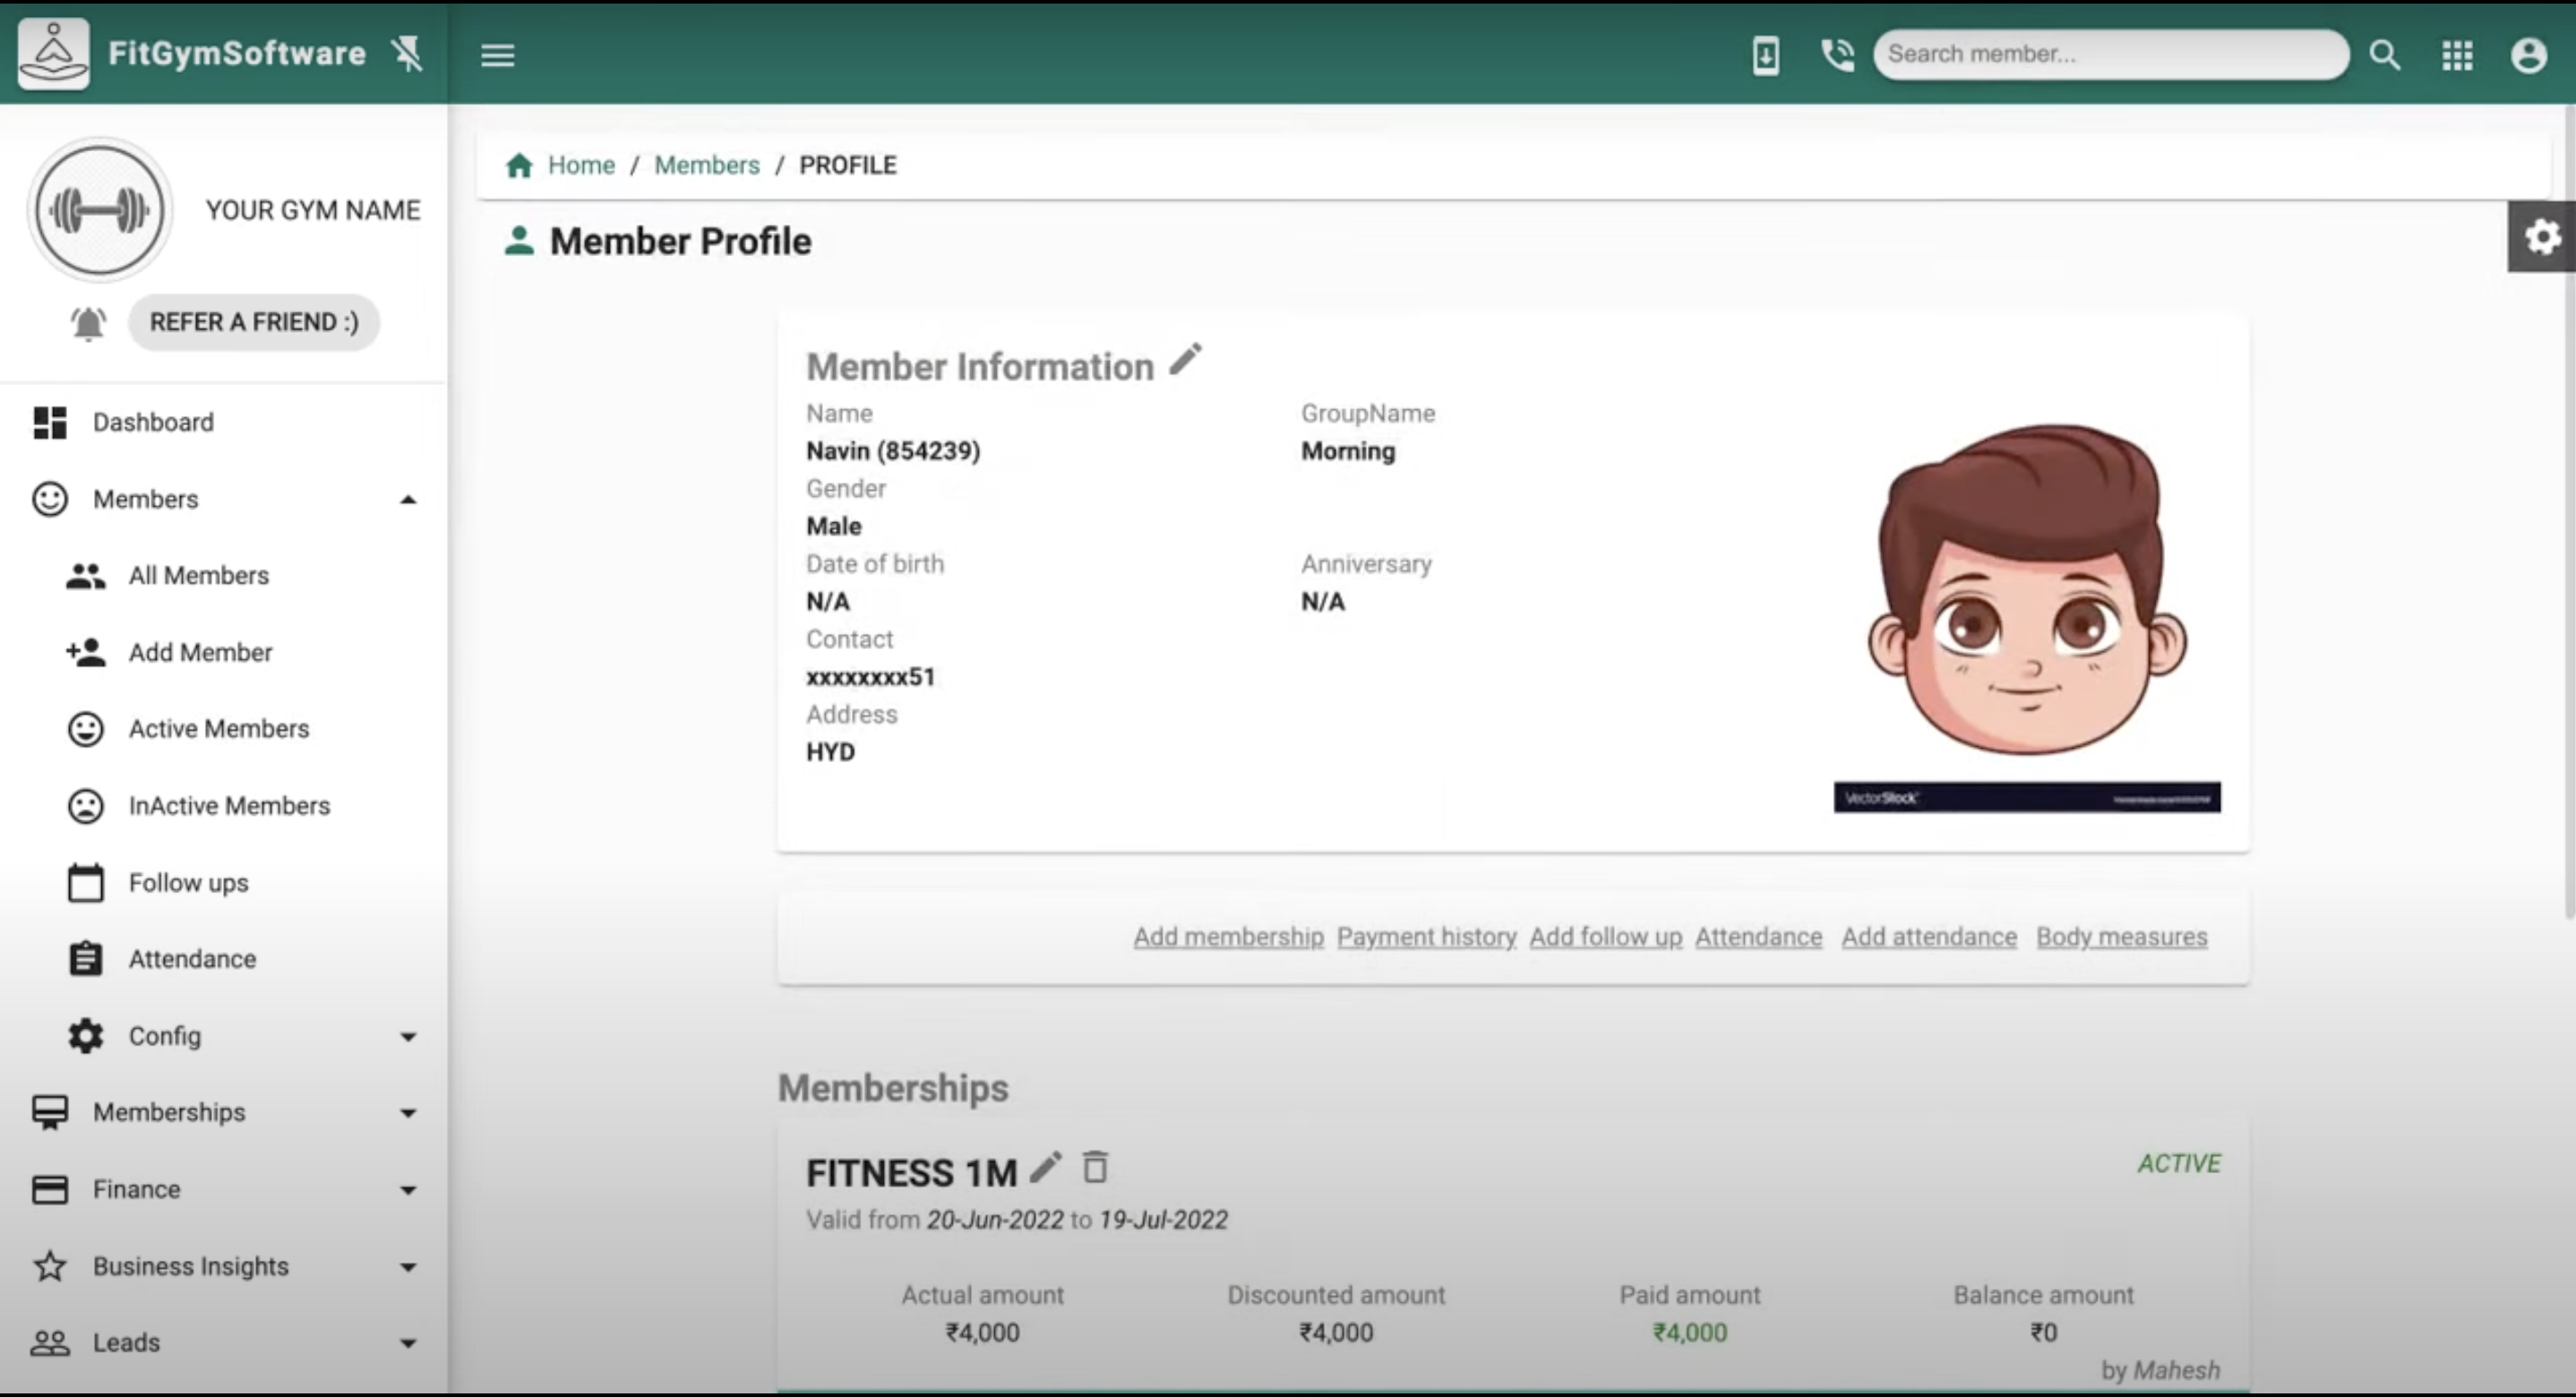 FitGymSoftware Software - Member Profile